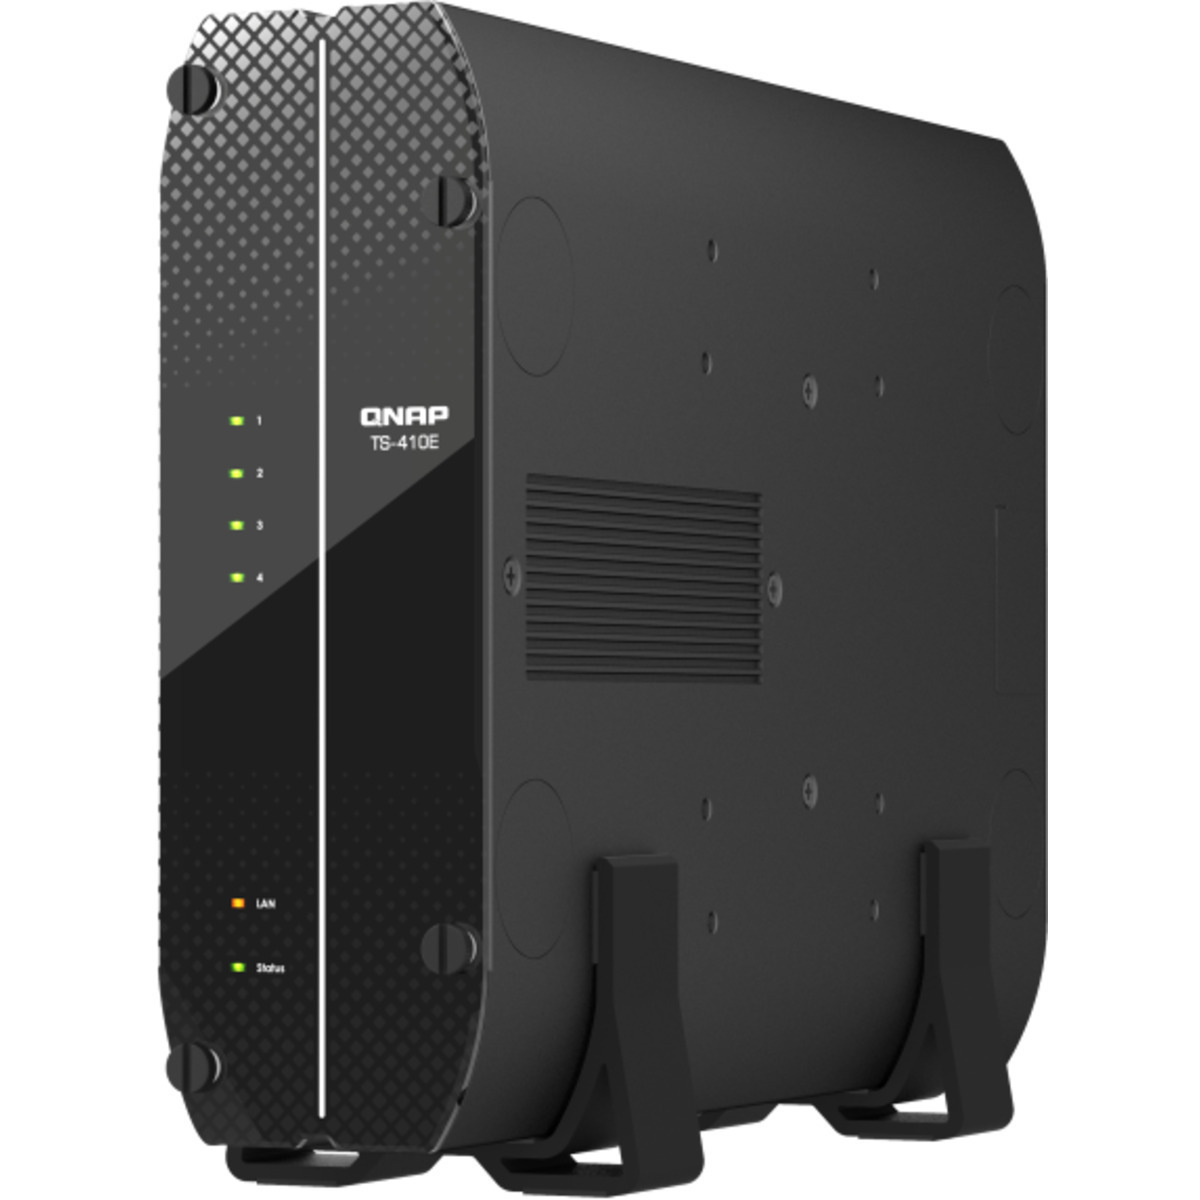 QNAP TS-410E 8tb 4-Bay Desktop Multimedia / Power User / Business NAS - Network Attached Storage Device 2x4tb Crucial MX500 CT4000MX500SSD1 2.5 560/510MB/s SATA 6Gb/s SSD CONSUMER Class Drives Installed - Burn-In Tested TS-410E